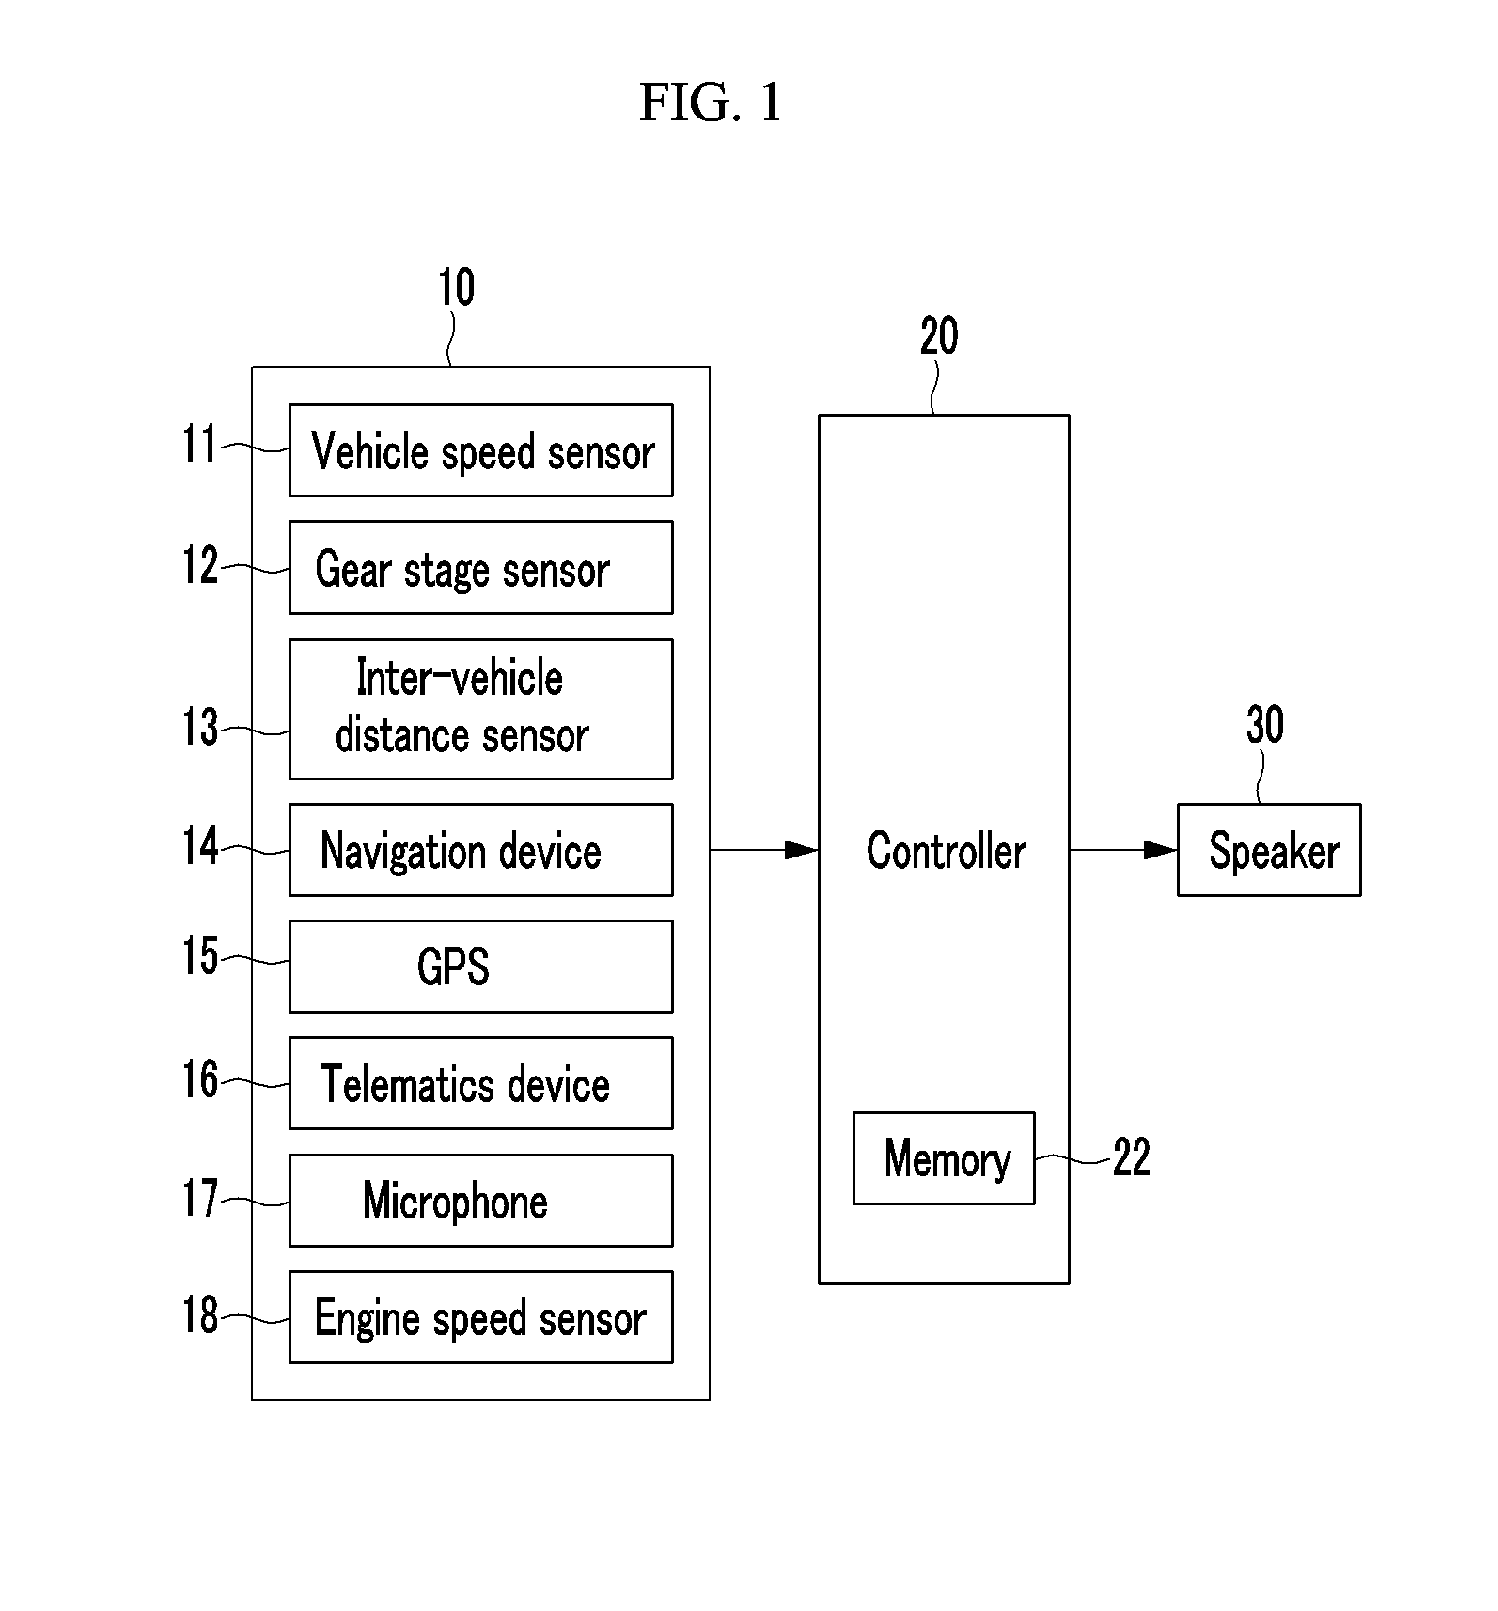 Virtual engine sound system for vehicle and method for controlling the system